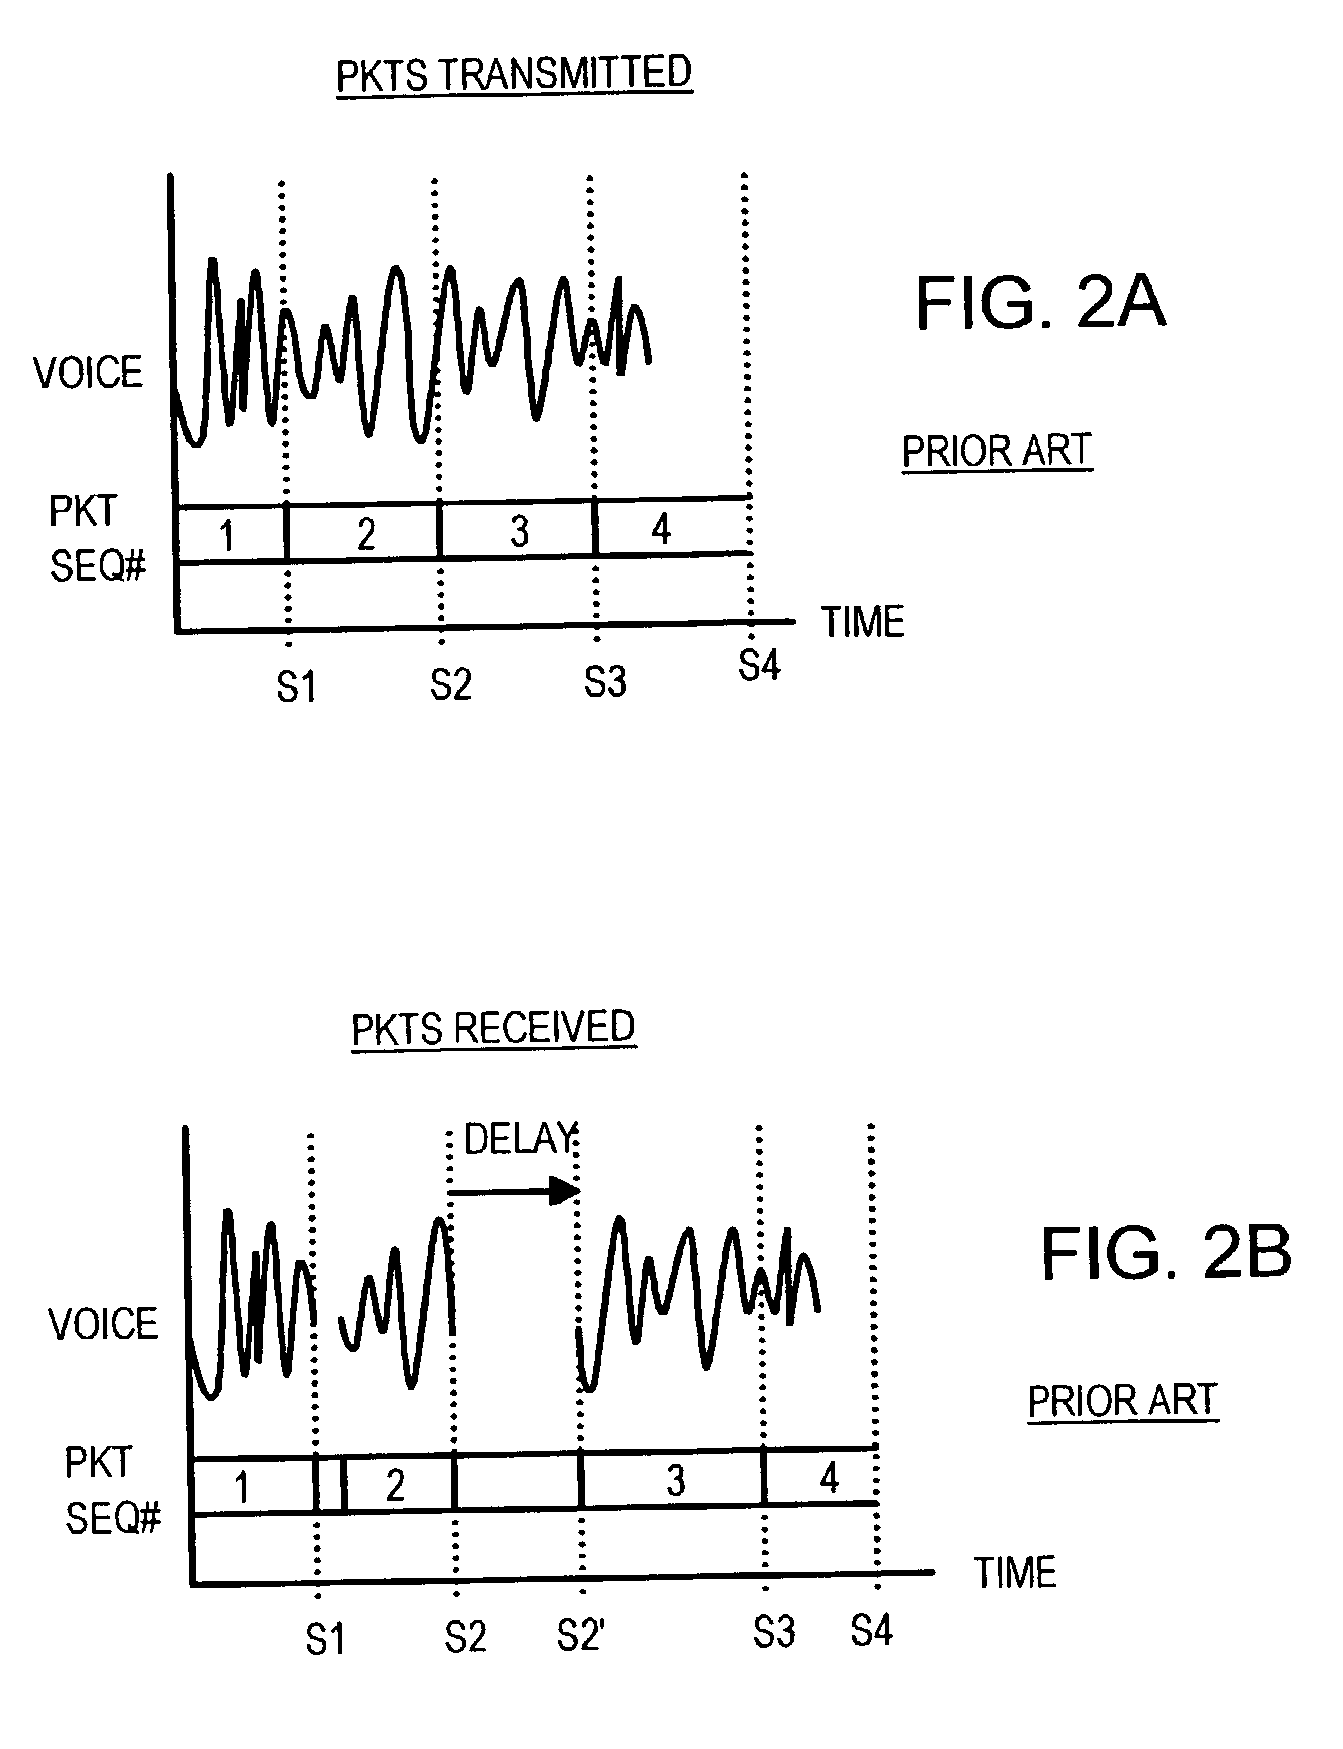 Closed-loop voice-over-internet-protocol (VOIP) with sender-controlled bandwidth adjustments prior to onset of packet losses